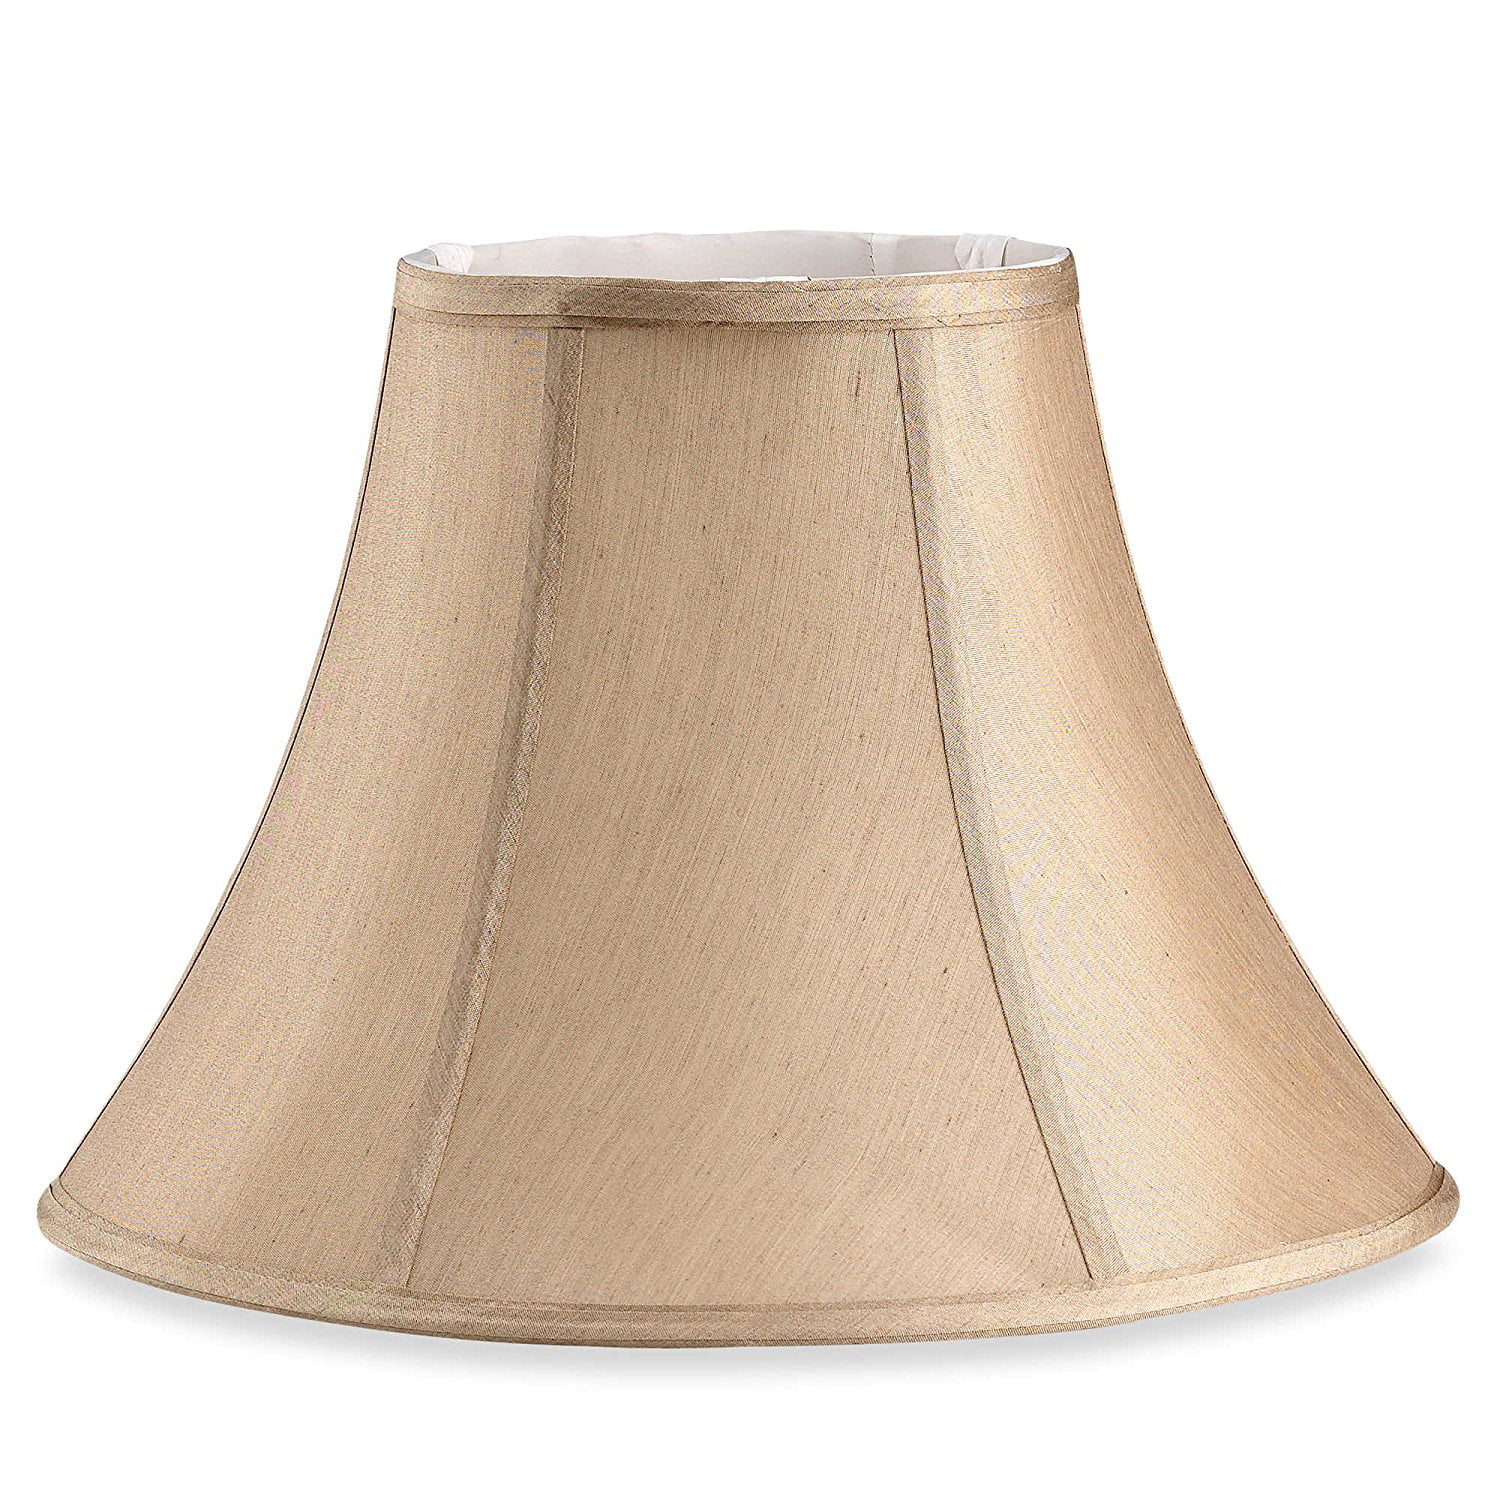 Large 15-Inch Bell Lamp Shade in Beige, Complete the look of your lamp